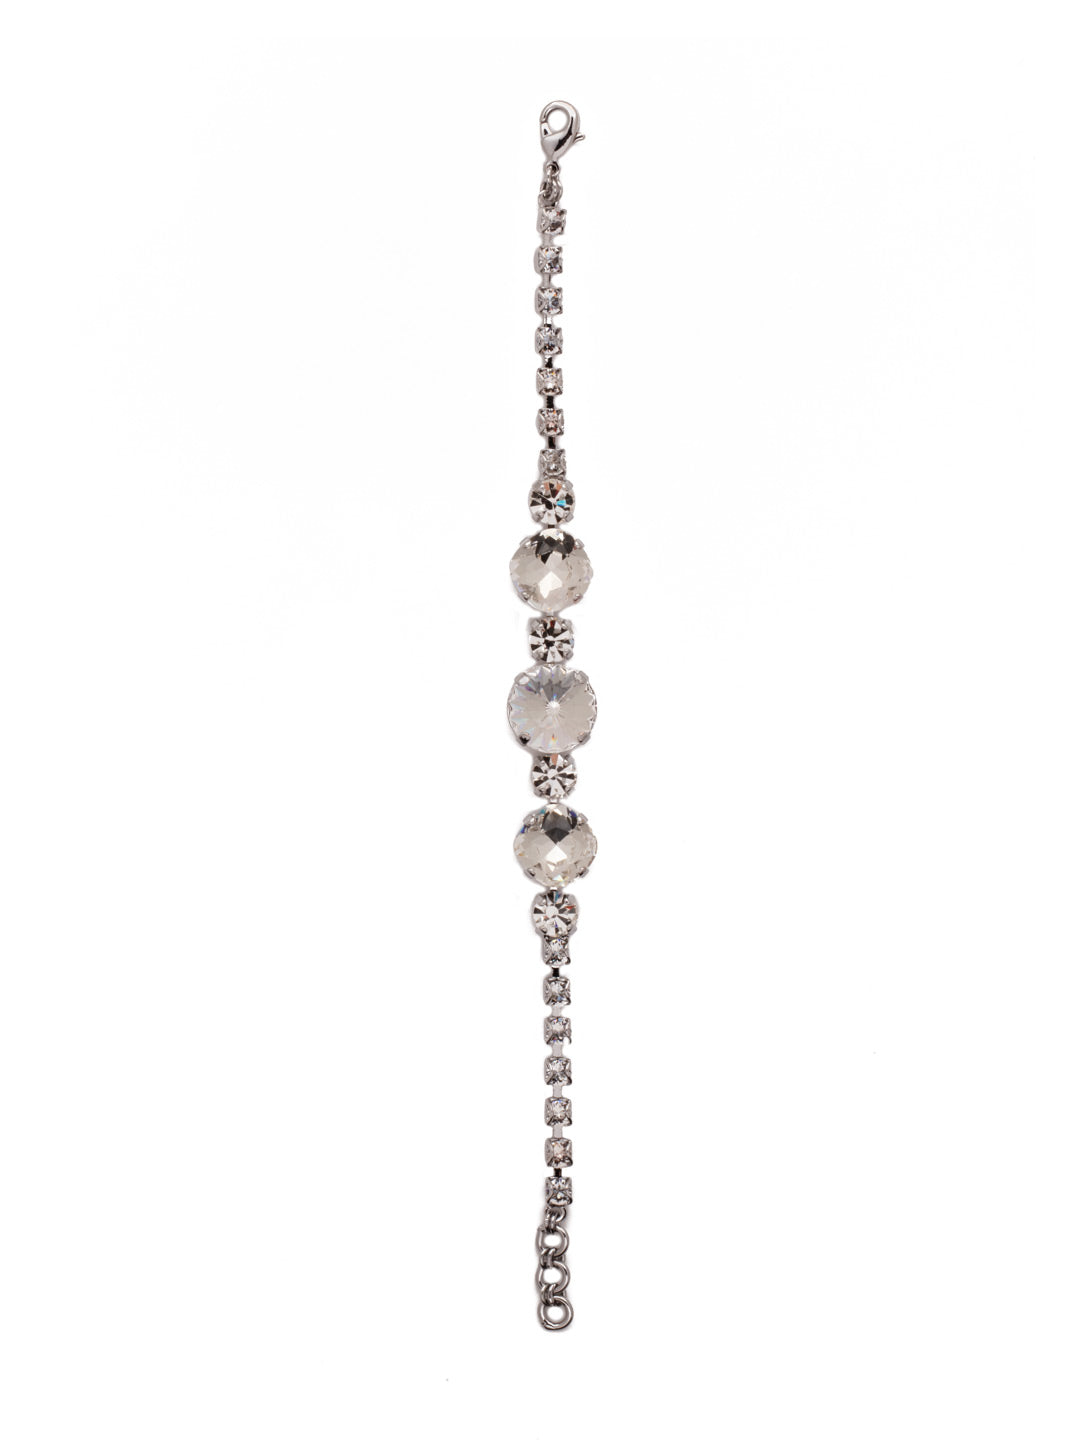 Half Circle Tennis Bracelet - BEY52PDCRY - <p>The Half Circle Tennis Bracelet adds the perfect amount of sparkle to every outfit. A crystal embellished chain connects varying sizes and colors of crystals with a lobster clasp closure. From Sorrelli's Crystal collection in our Palladium finish.</p>